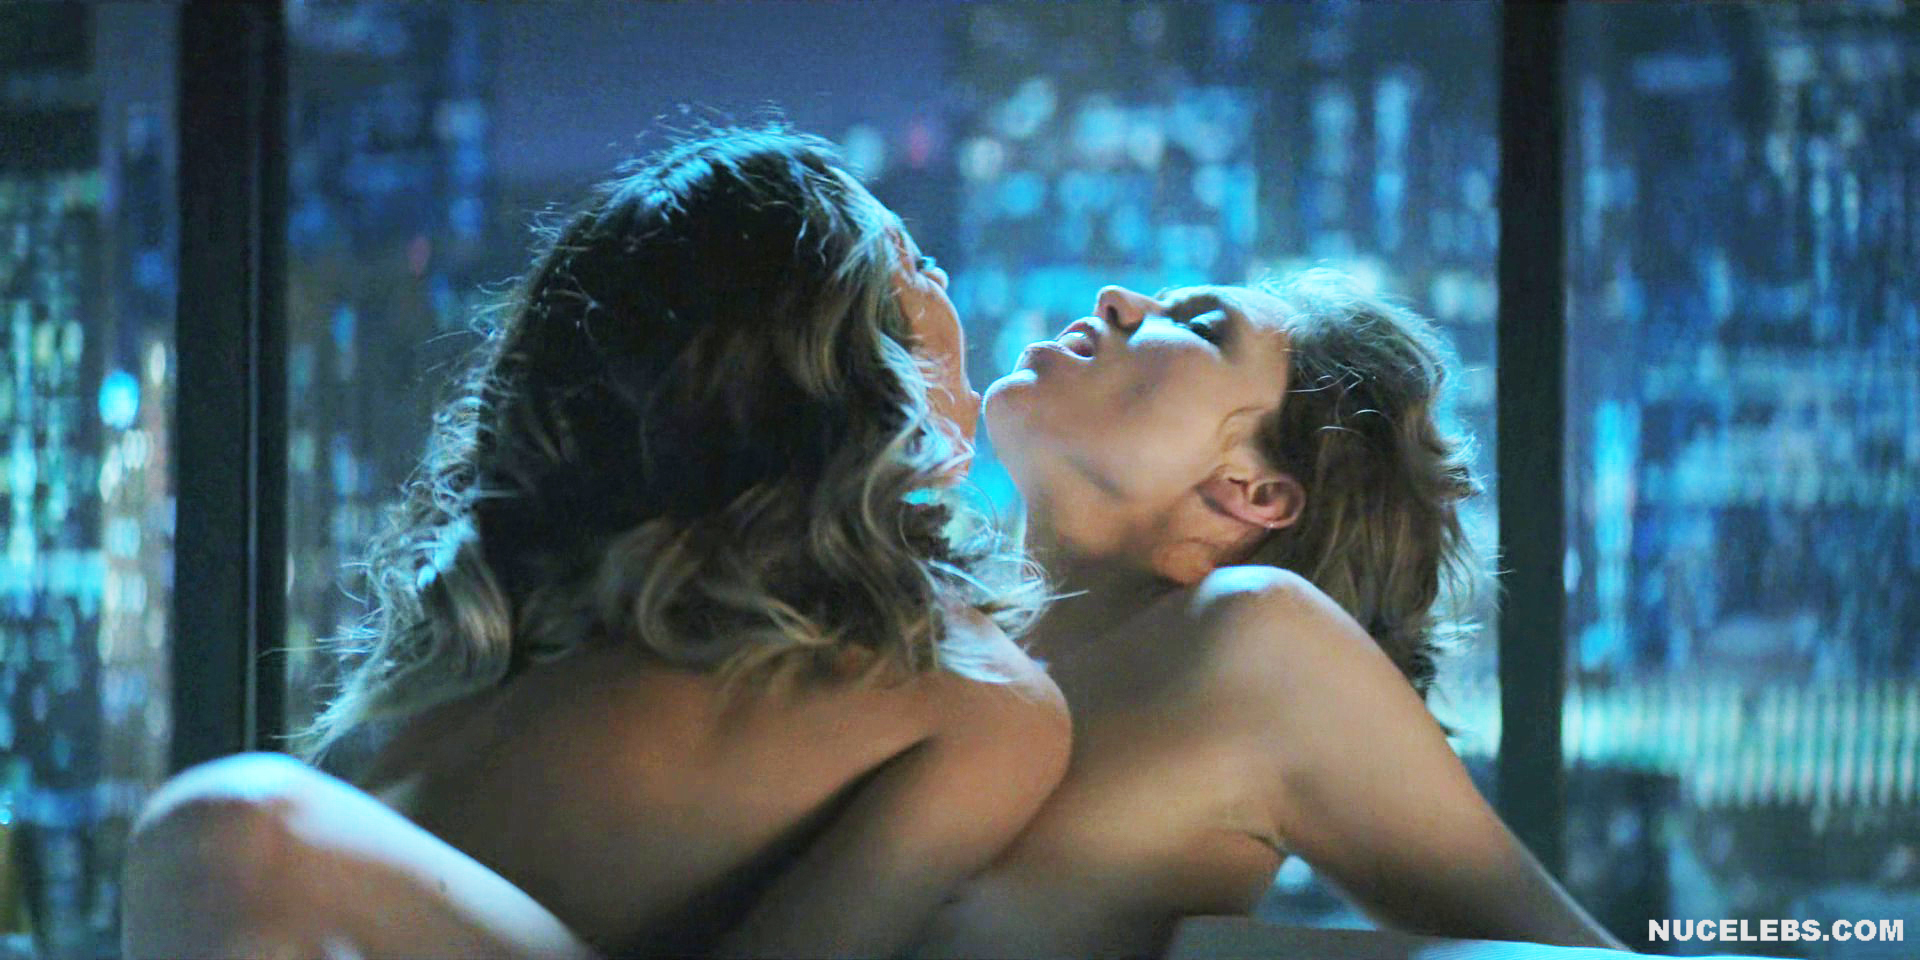 Lili Simmons Nude And Wild Lesbian Sex in Power Book IV Force pic